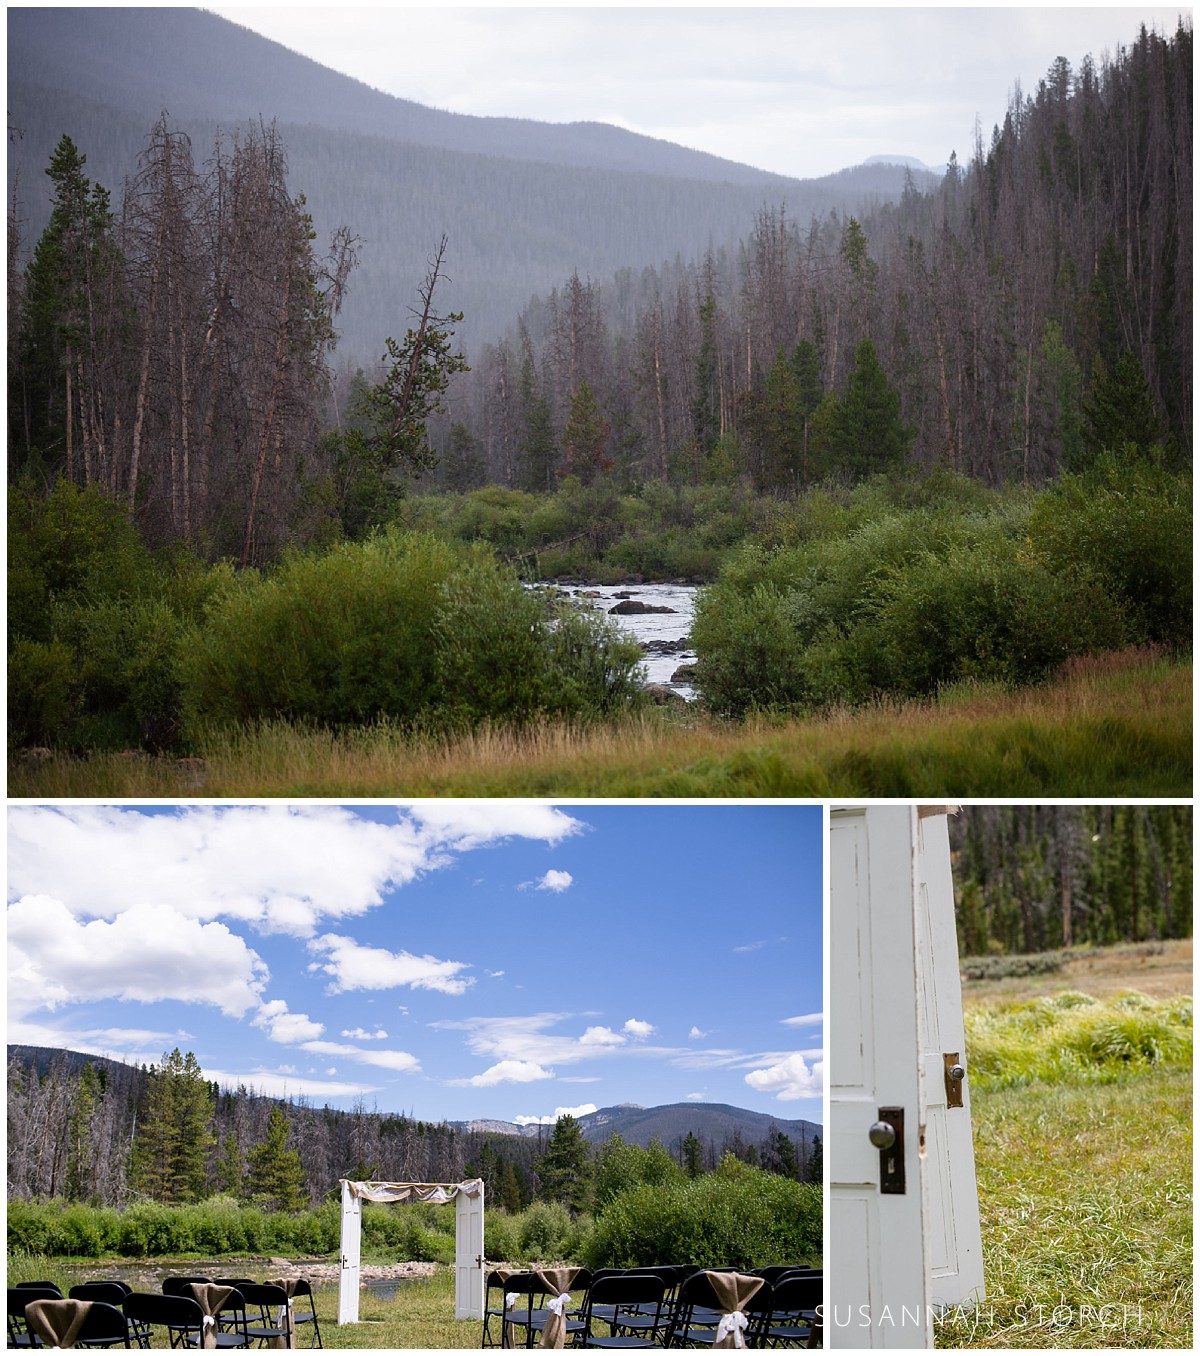 three images of the scenery as seen from the Double A Barn